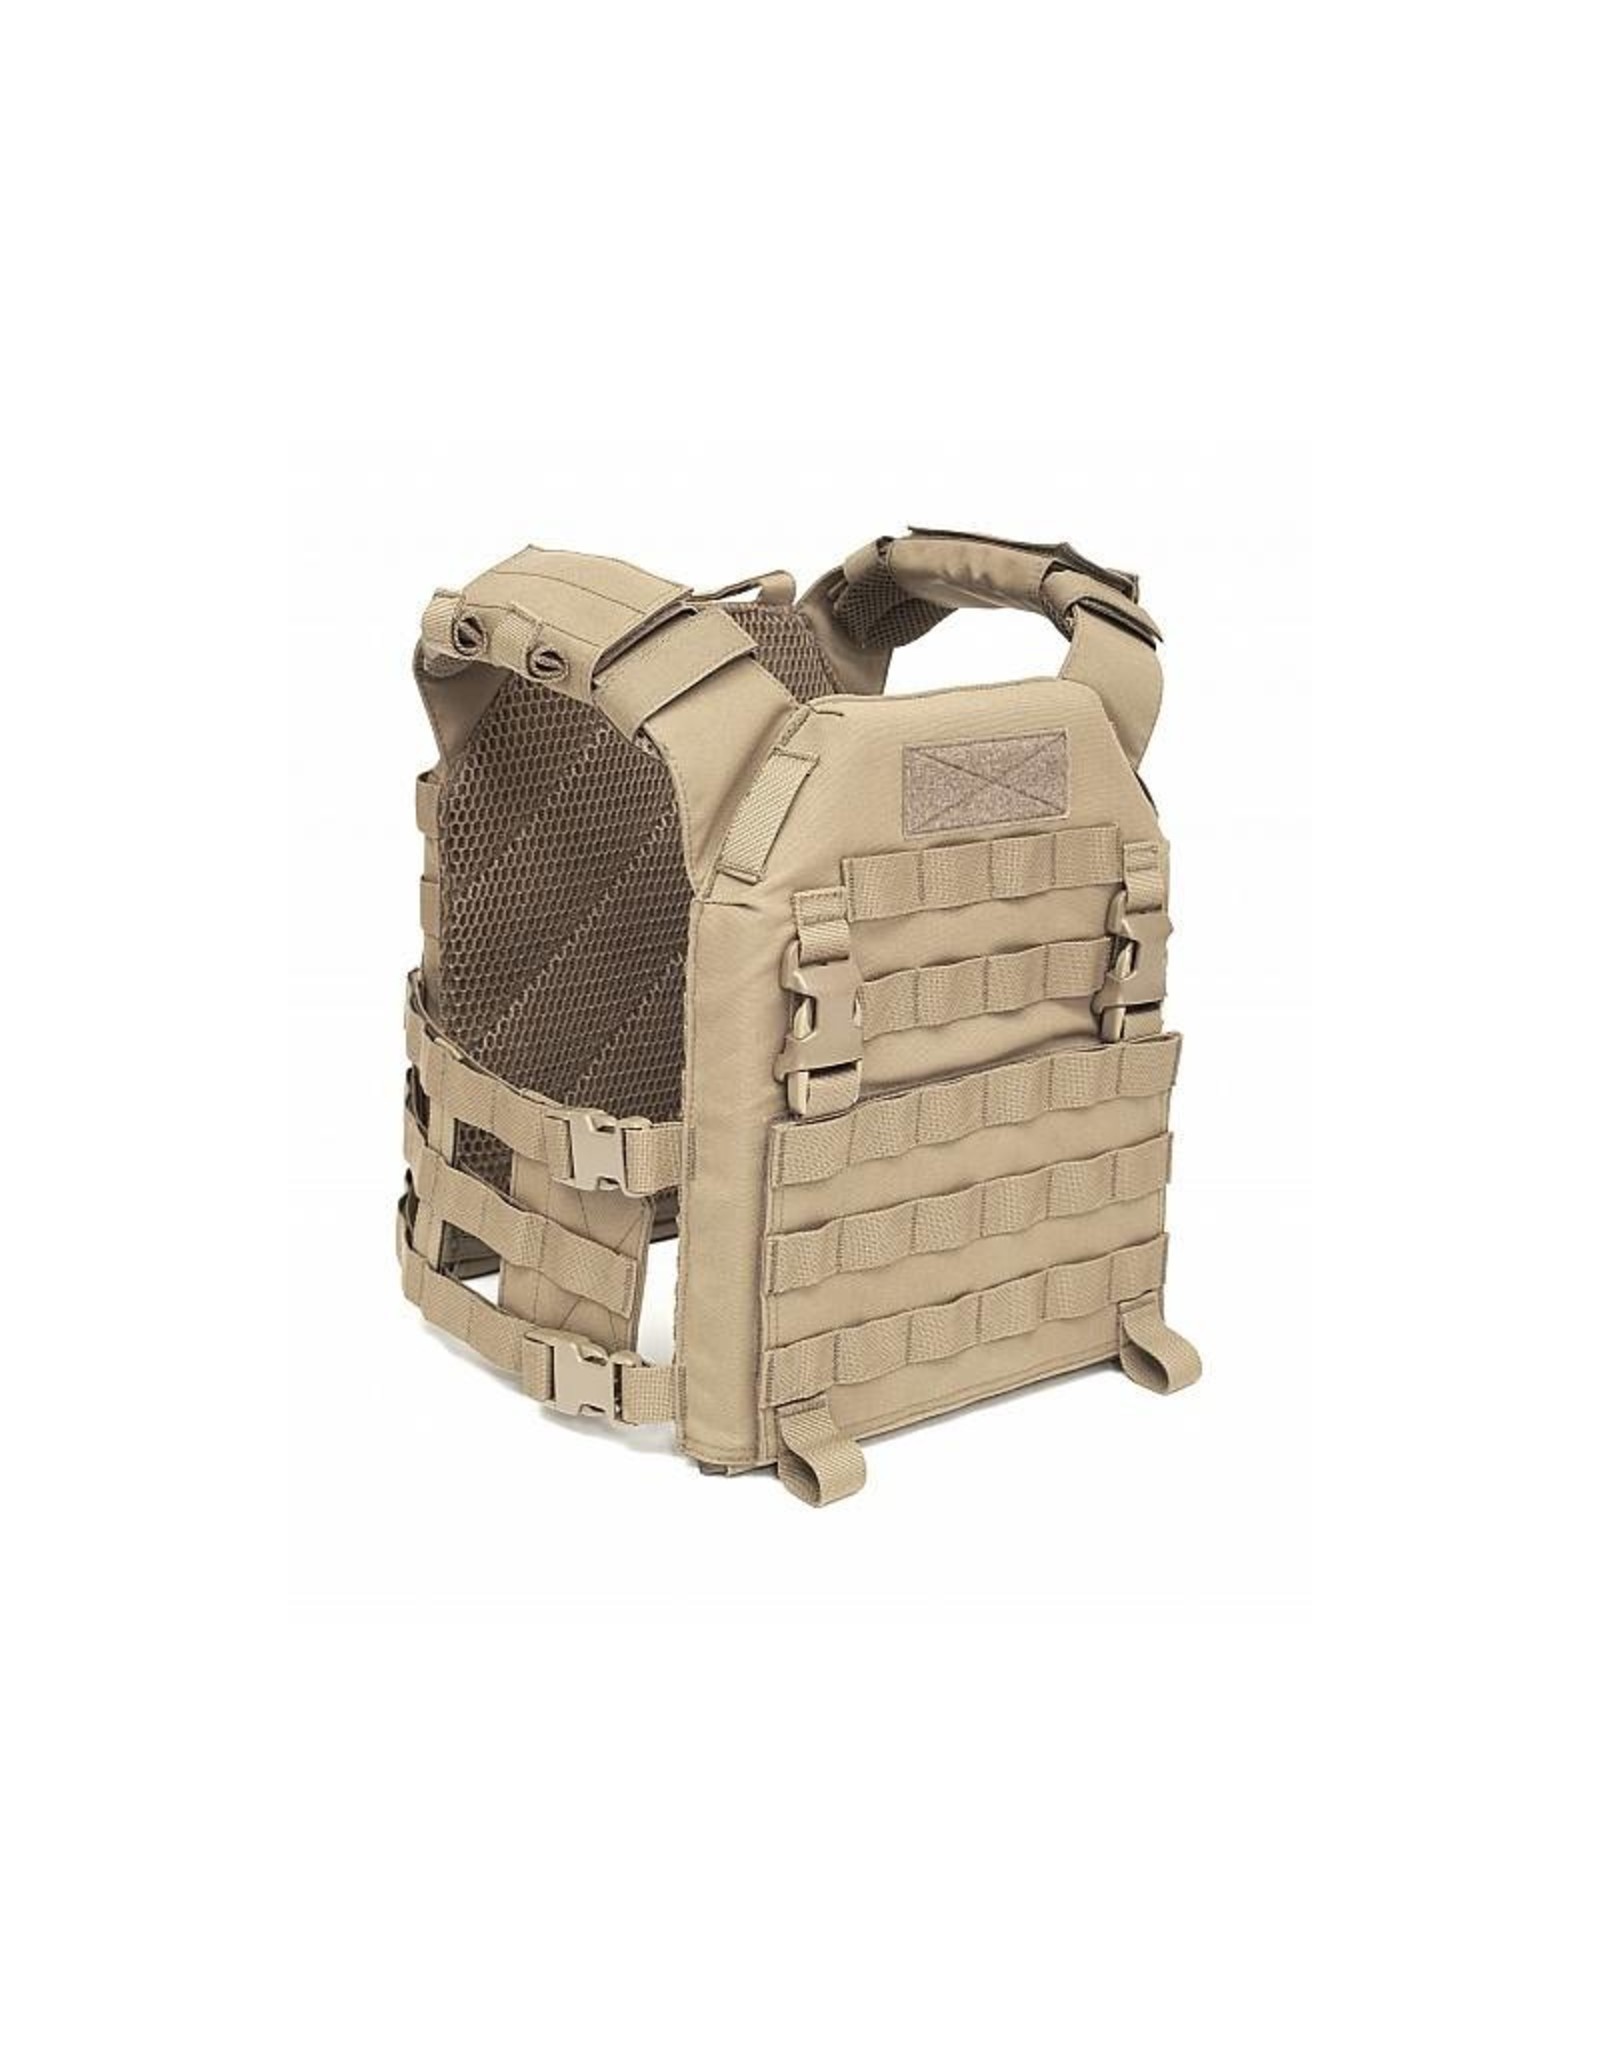 Warrior Recon Plate Carrier SAPI - Coyote Tan